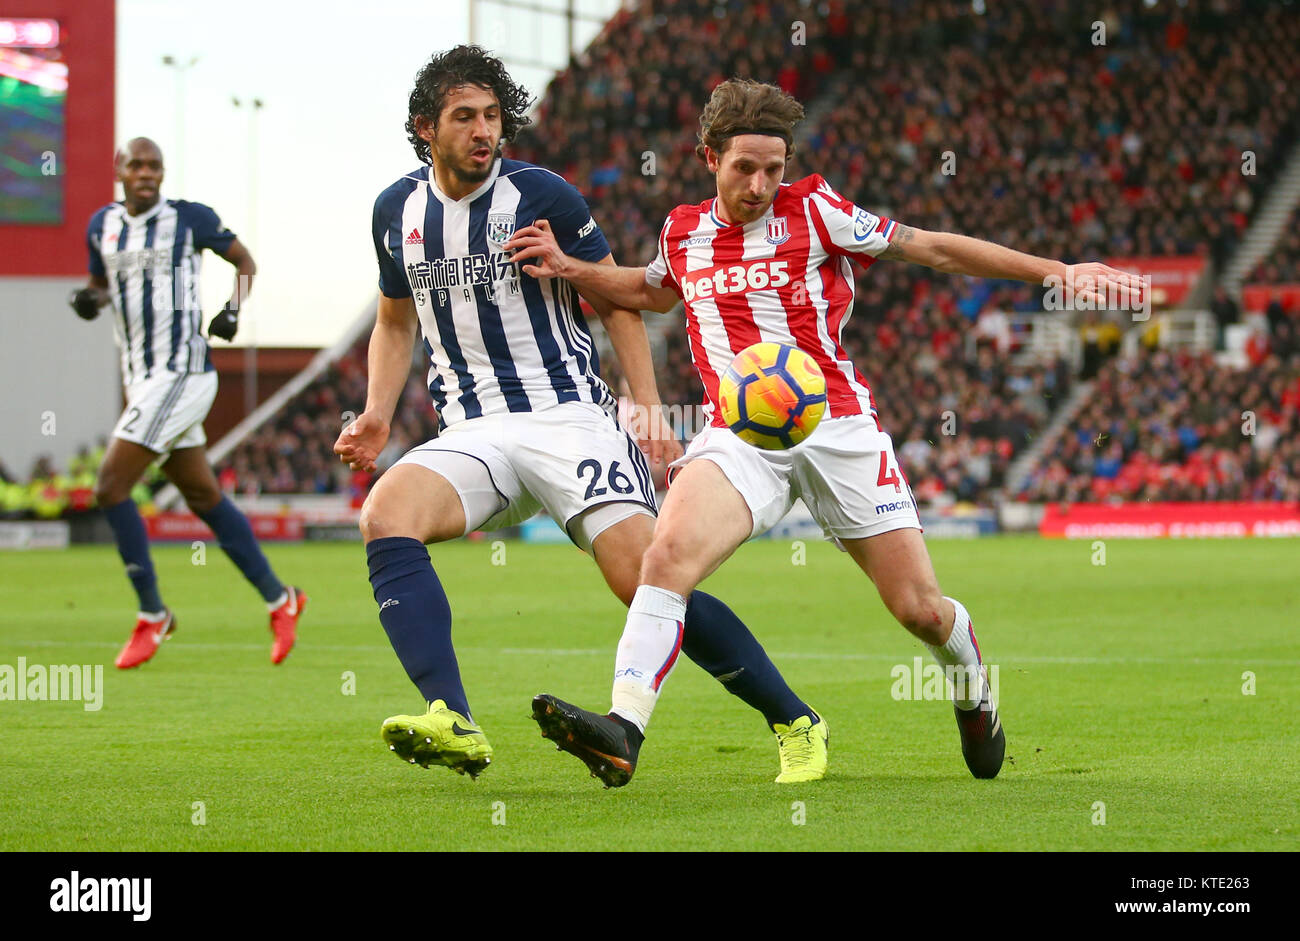 West Bromwich Albion's Ahmed Hegazy (left) and Stoke City's Joe Allen battle for the ball during the Premier League match at the Bet365 Stadium, Stoke. Stock Photo